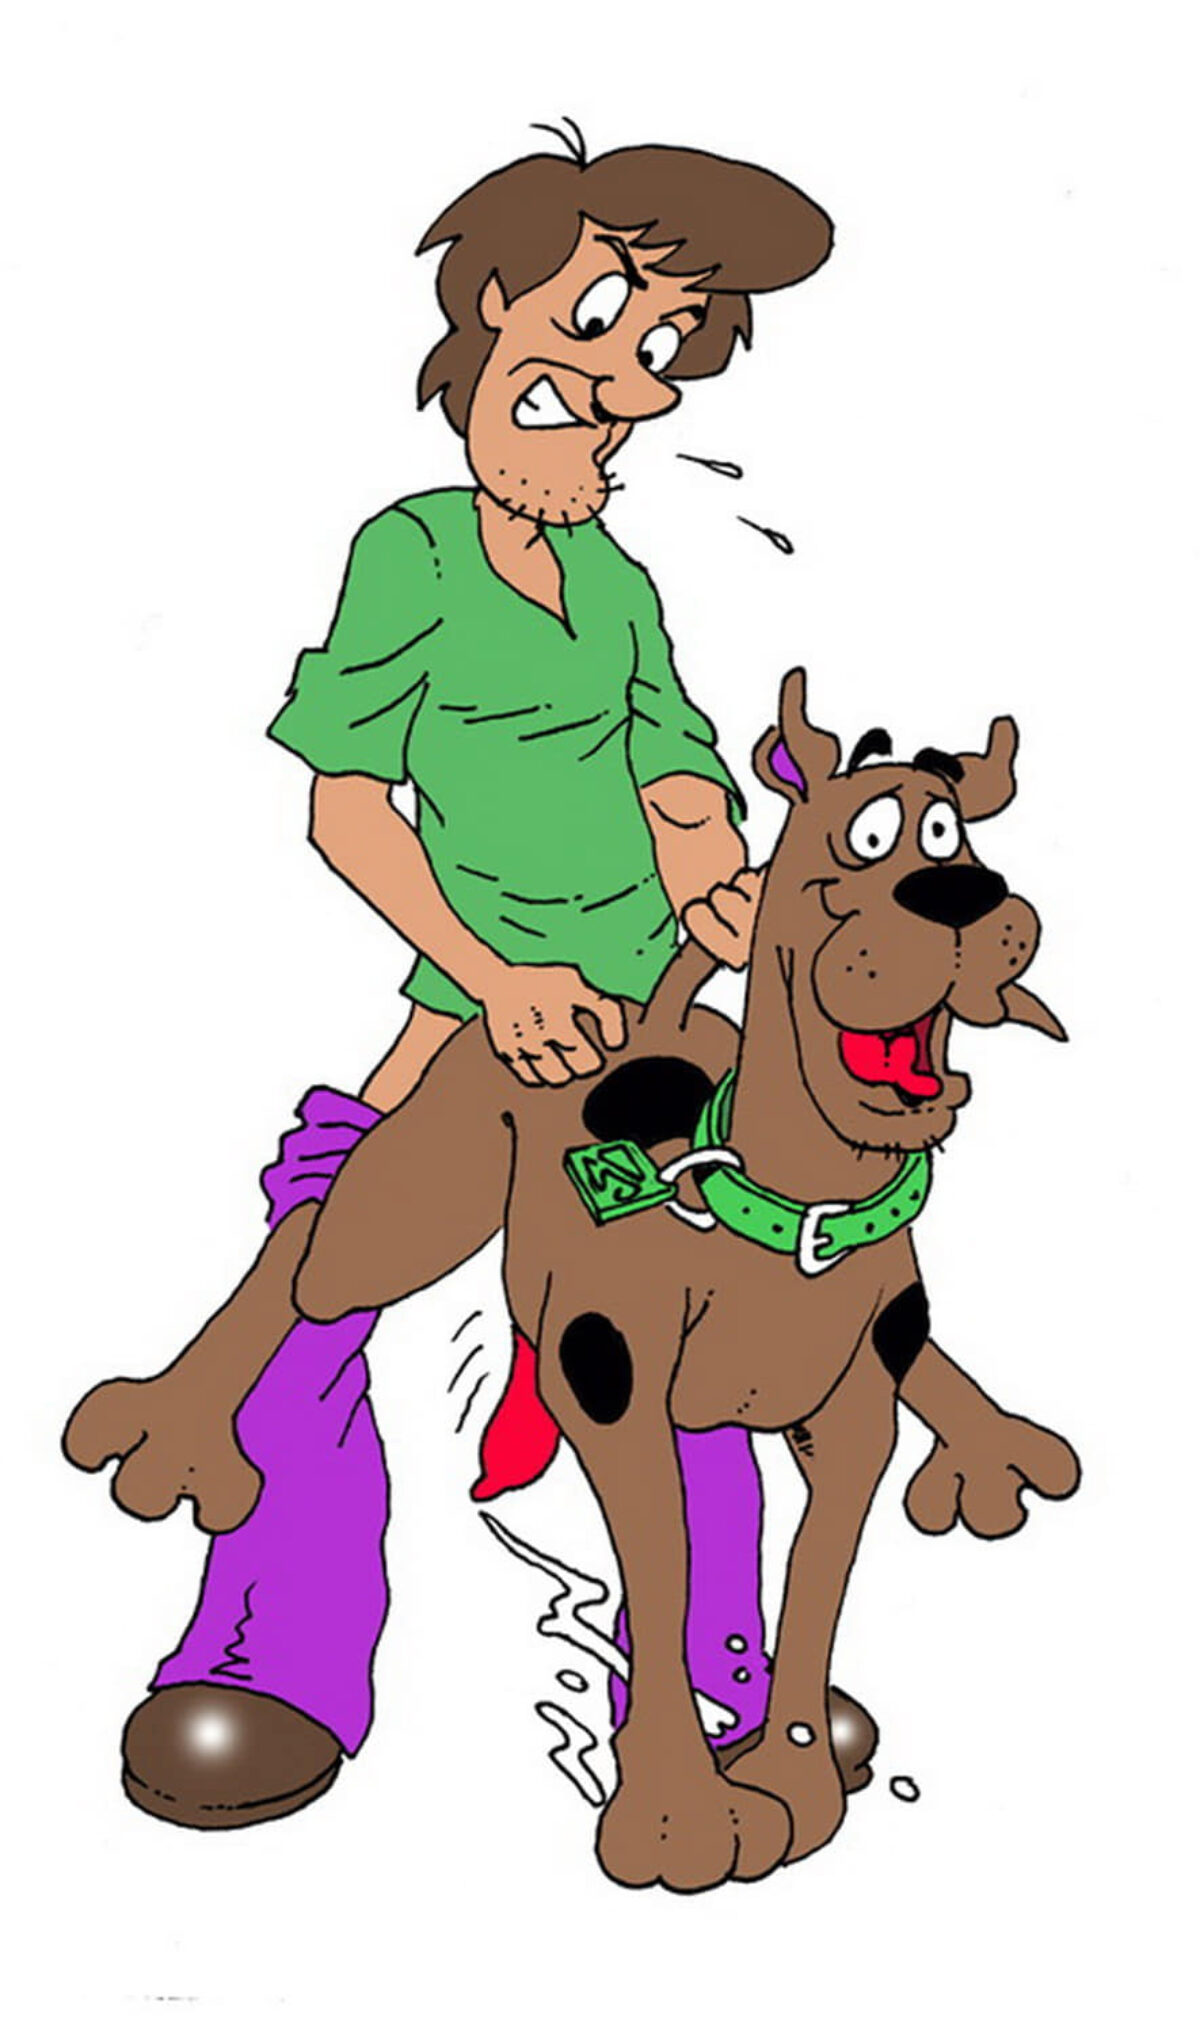 Sexy Scooby Doo Shaggy Porn - Shaggy Rogers and Scooby Penis Gay < Your Cartoon Porn